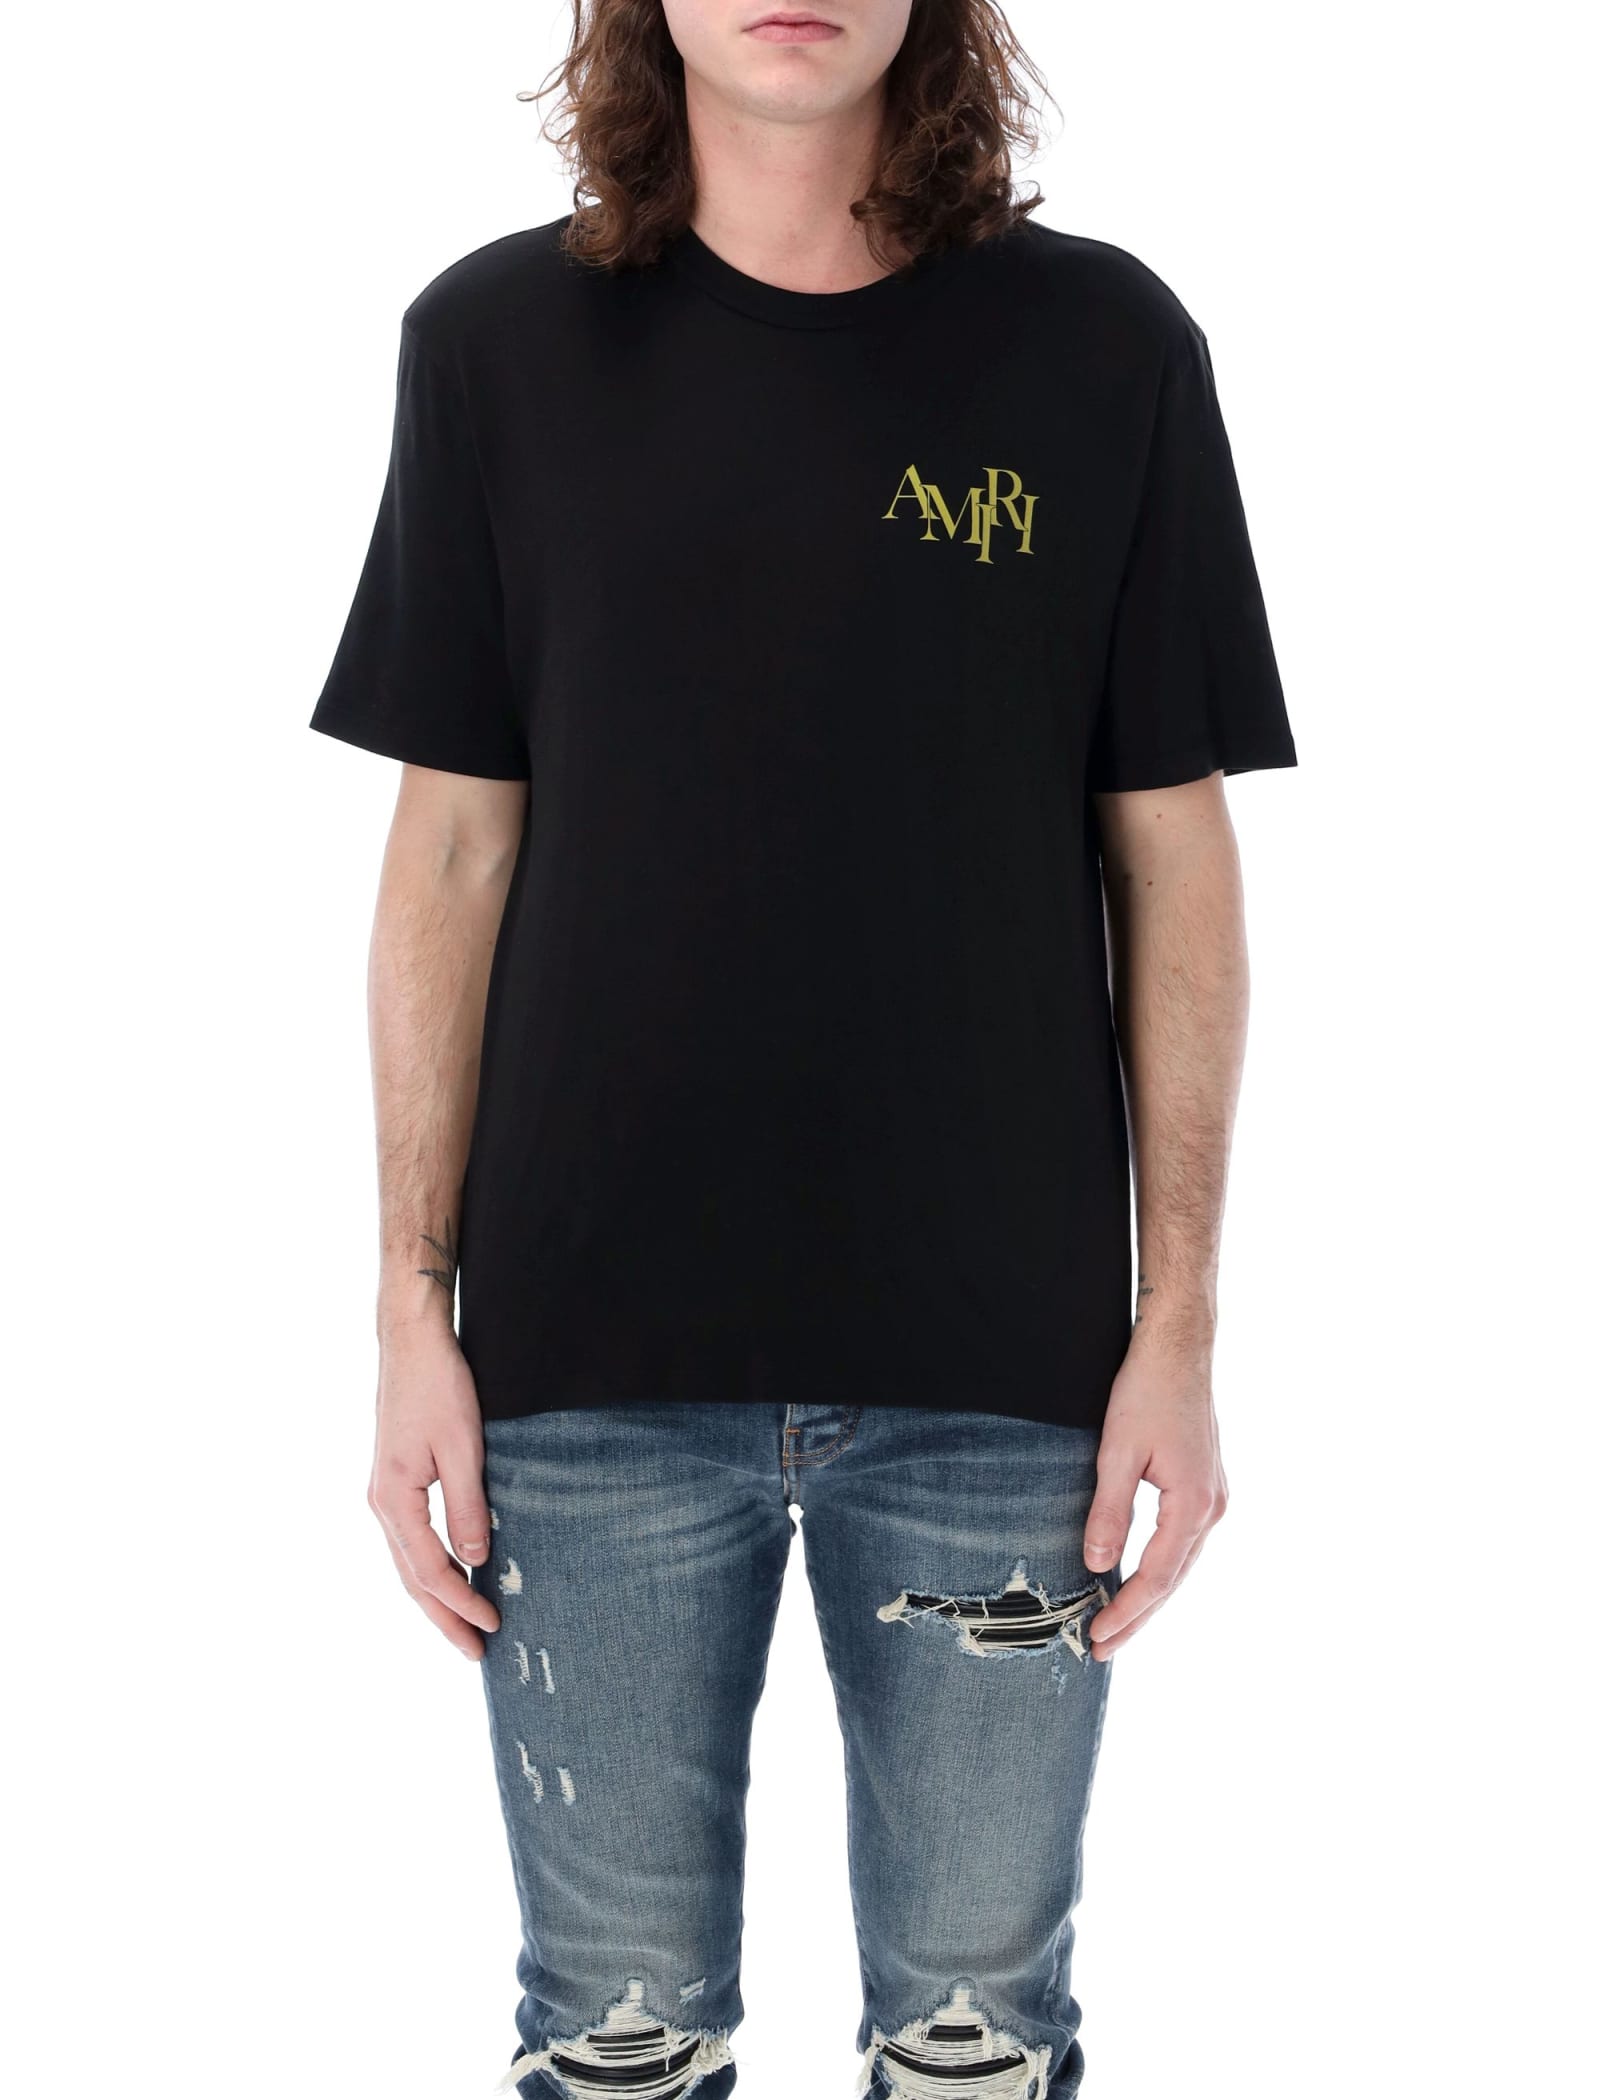 Crystal Champagne T-shirt